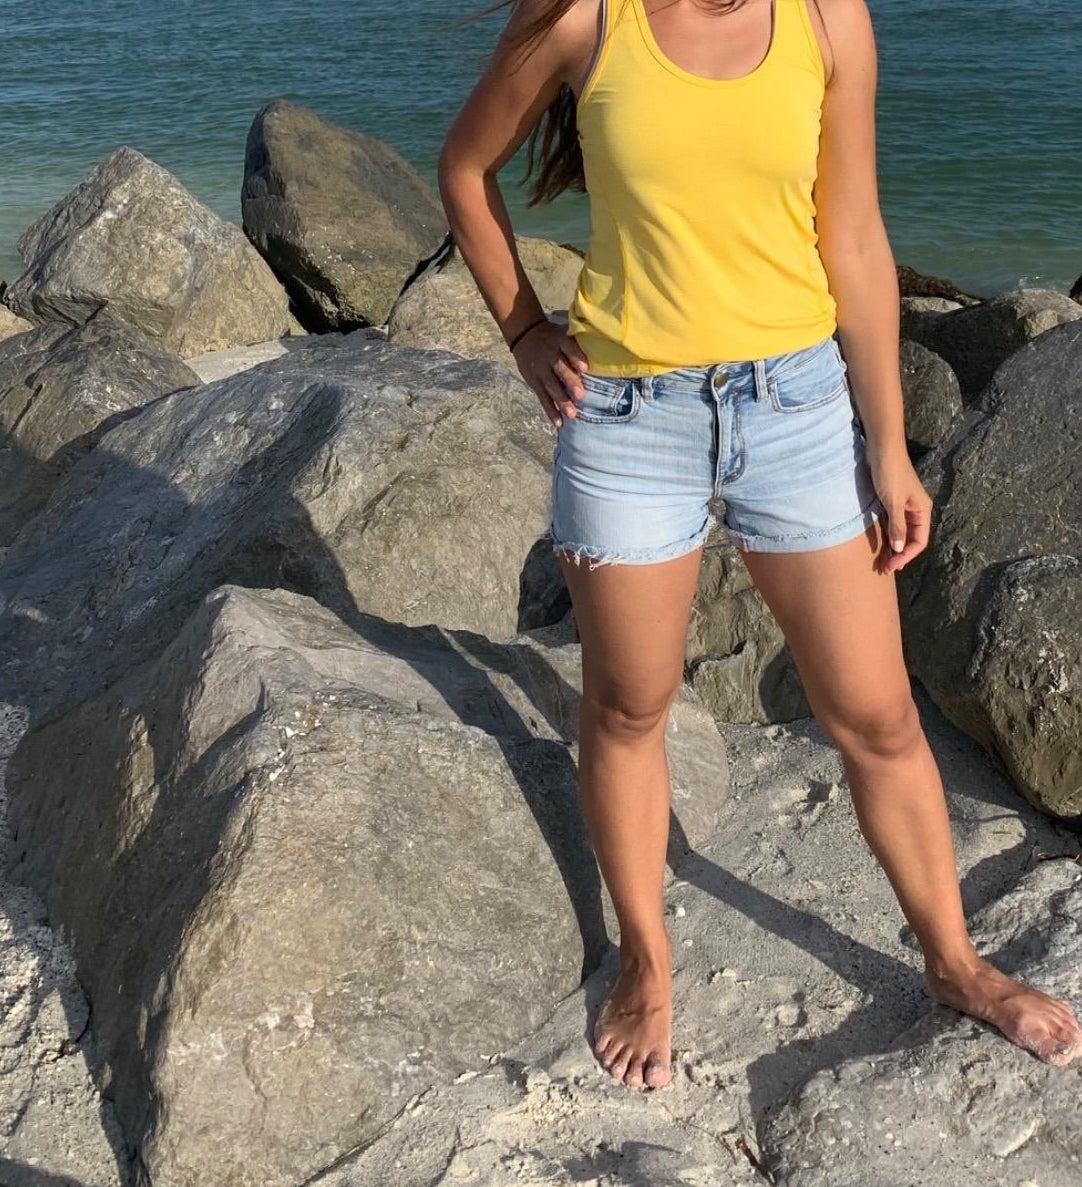 Reviewer standing on beach rocks in yellow tank